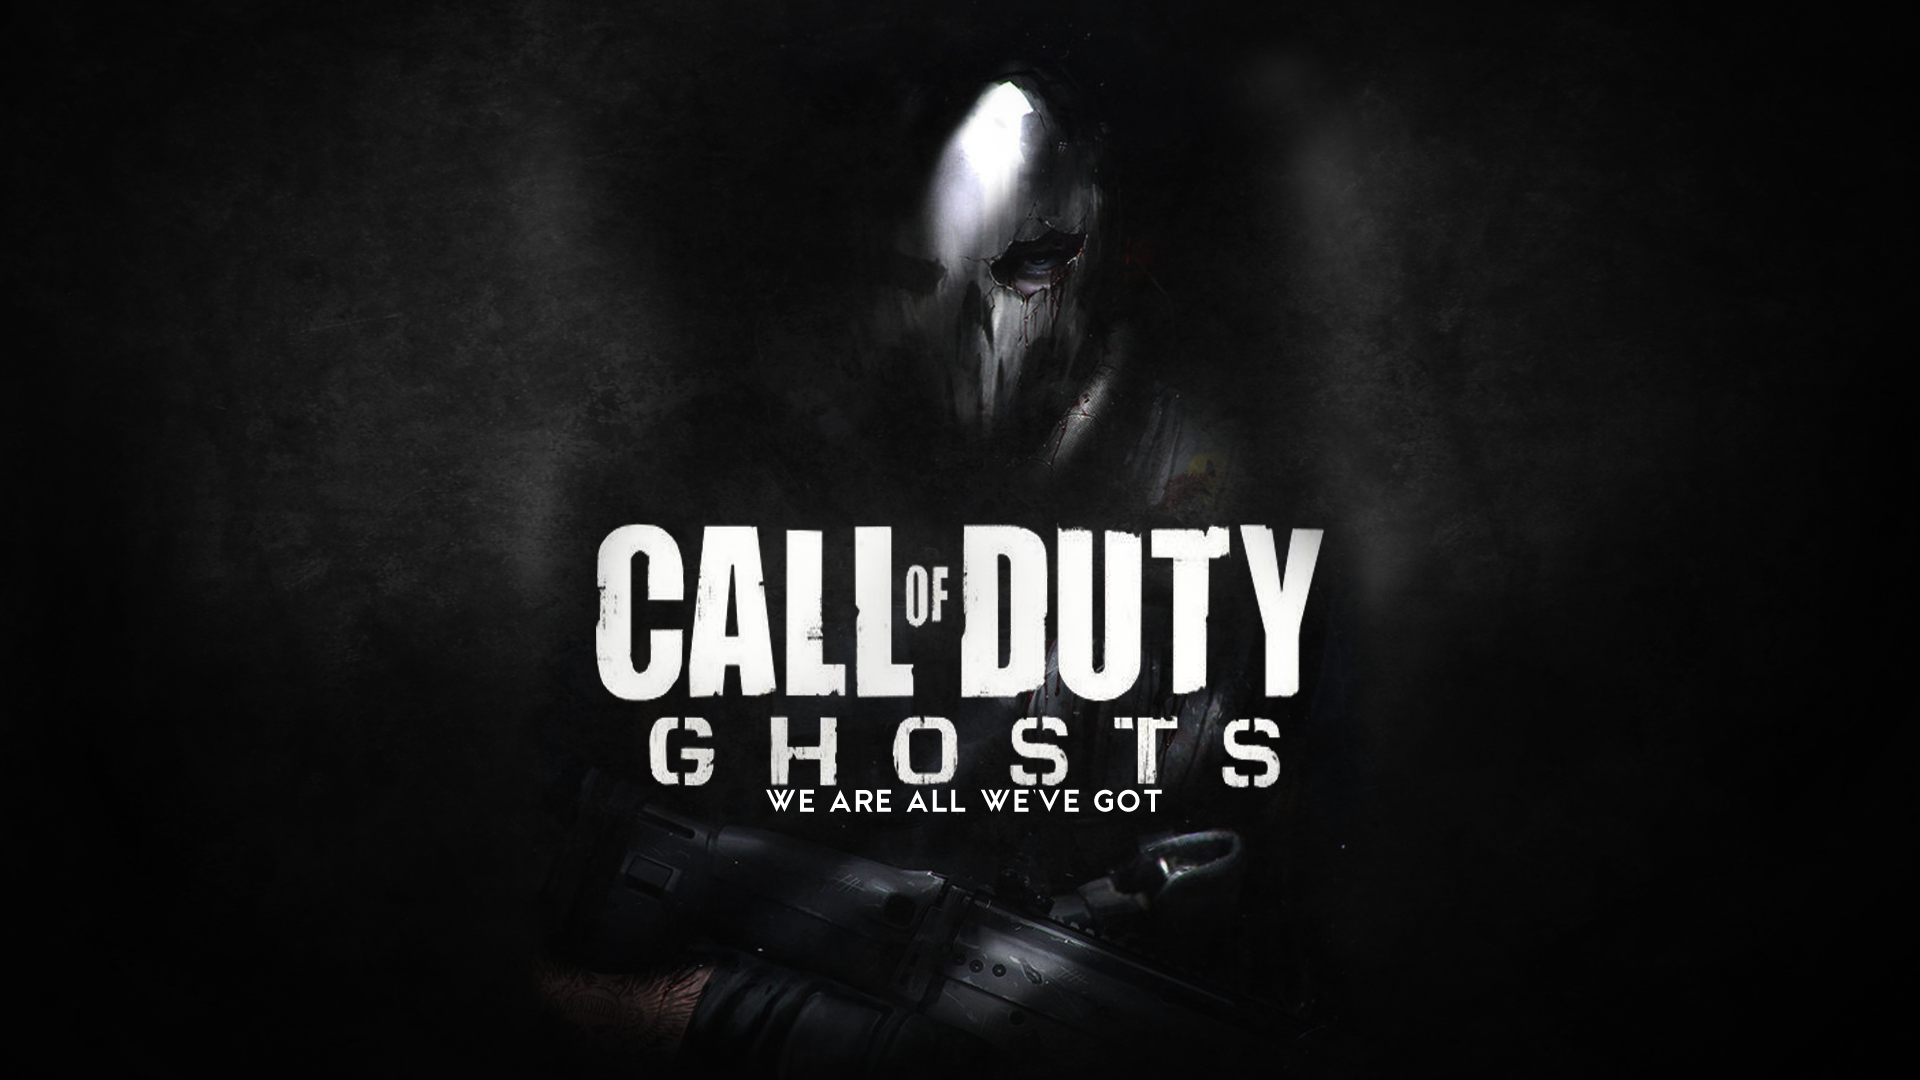 Call of Duty: Ghosts 2